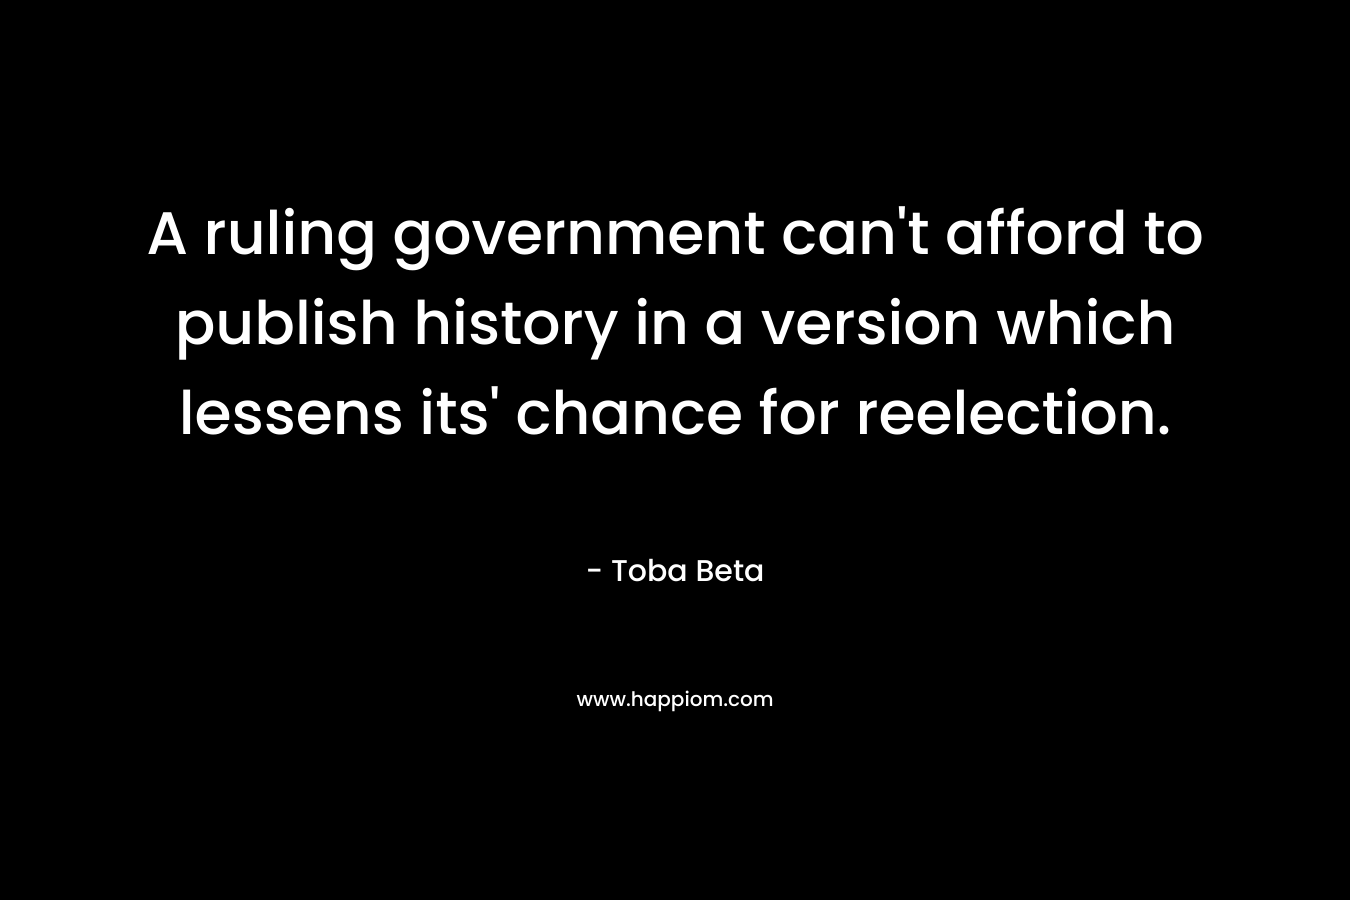 A ruling government can’t afford to publish history in a version which lessens its’ chance for reelection. – Toba Beta